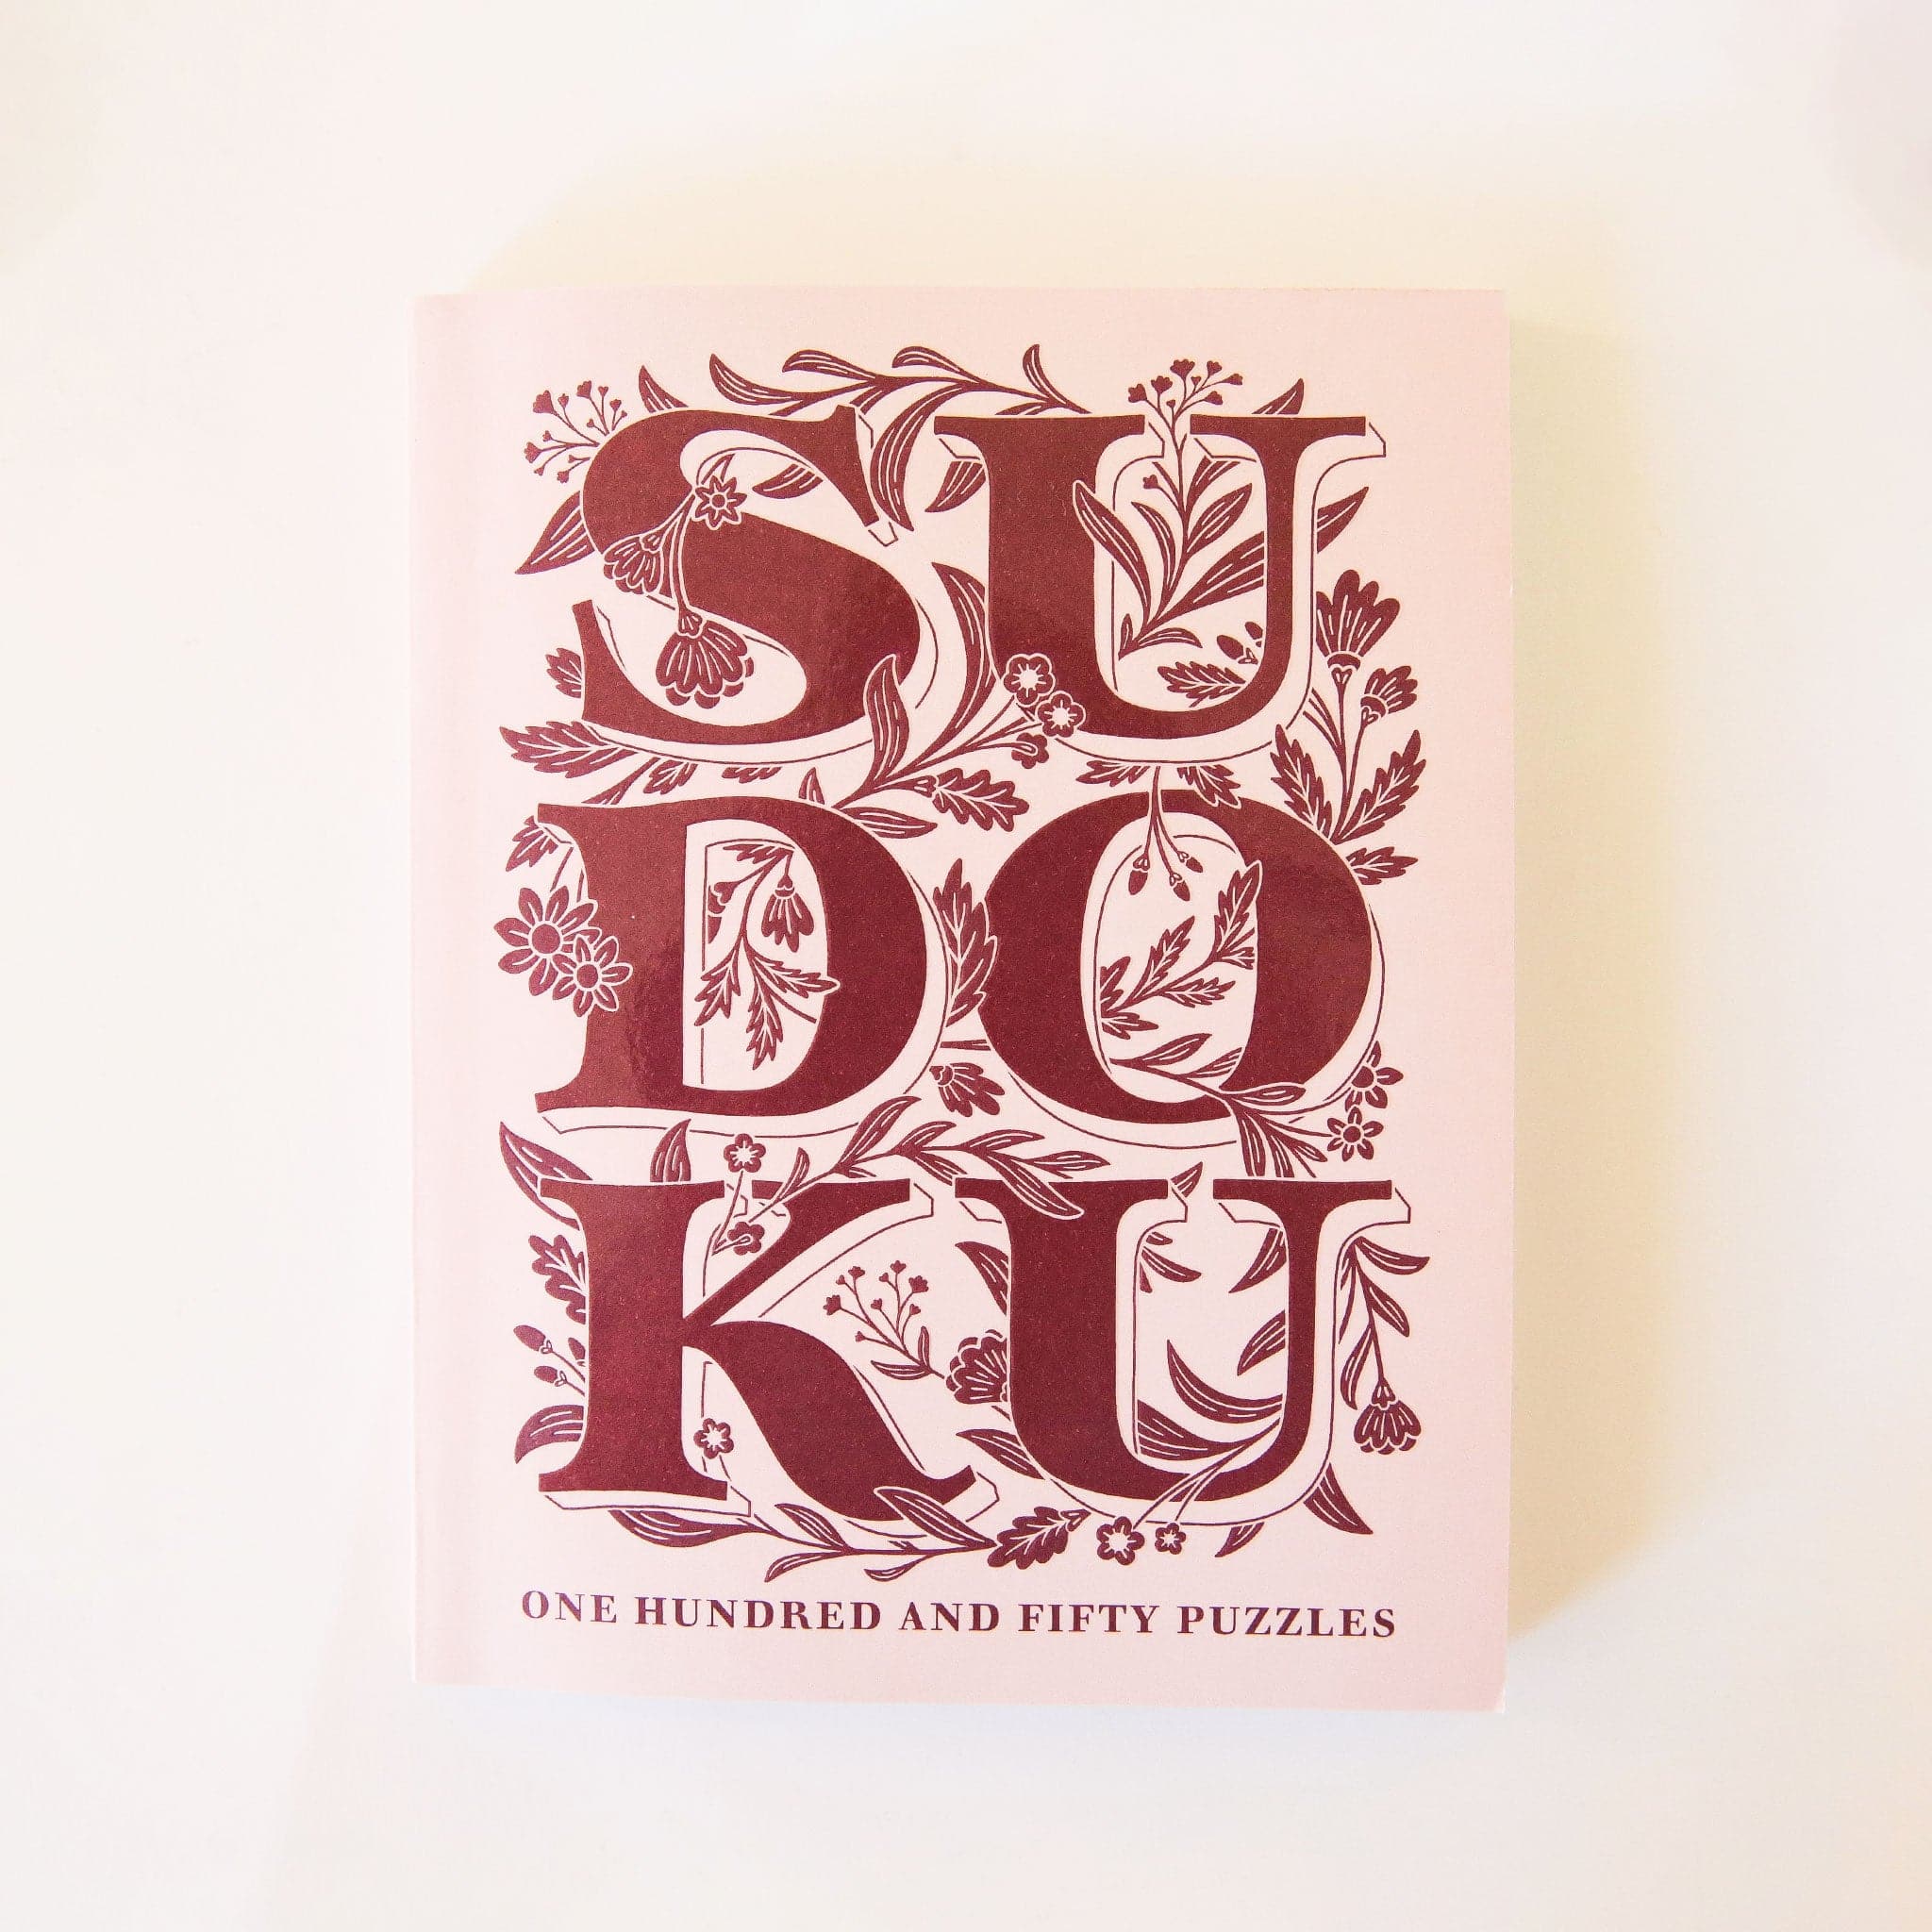 Pastel pink paperback puzzle book titled &#39;Sudoku&#39; in large magenta capital lettering. The letters are accented with delightful floral detailing. Below the large lettering reads &#39;One hundred and fifty puzzles&#39; towards the bottom of the cover. 